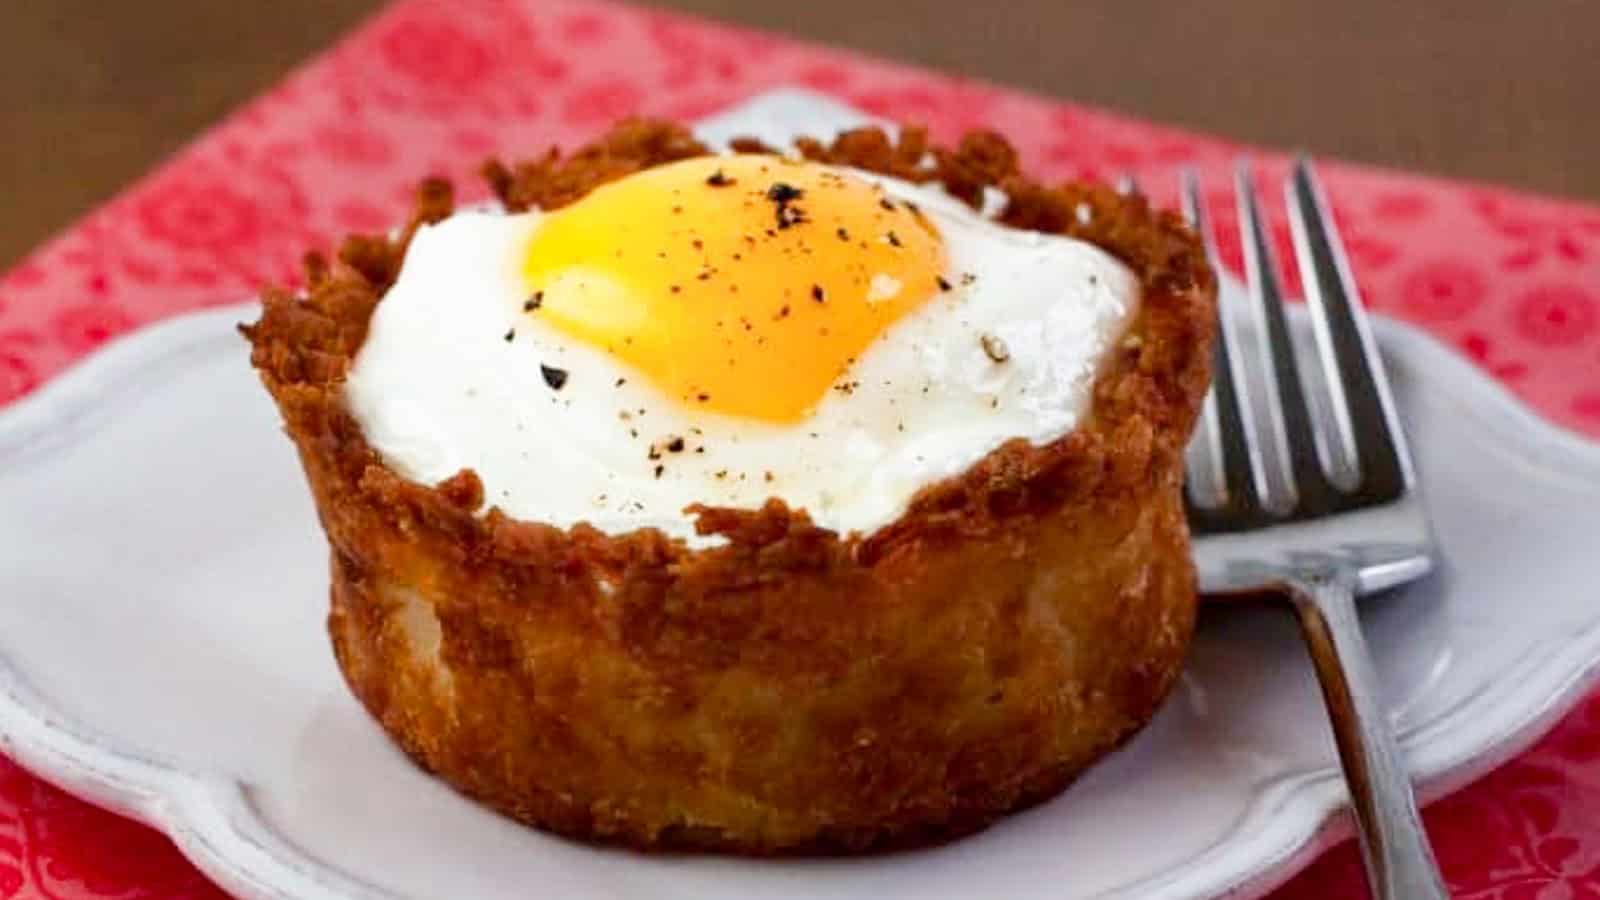 A breakfast dish: crispy potato nest with a sunny-side-up egg on top, seasoned with black pepper. A fork is placed on the right side of the white plate.